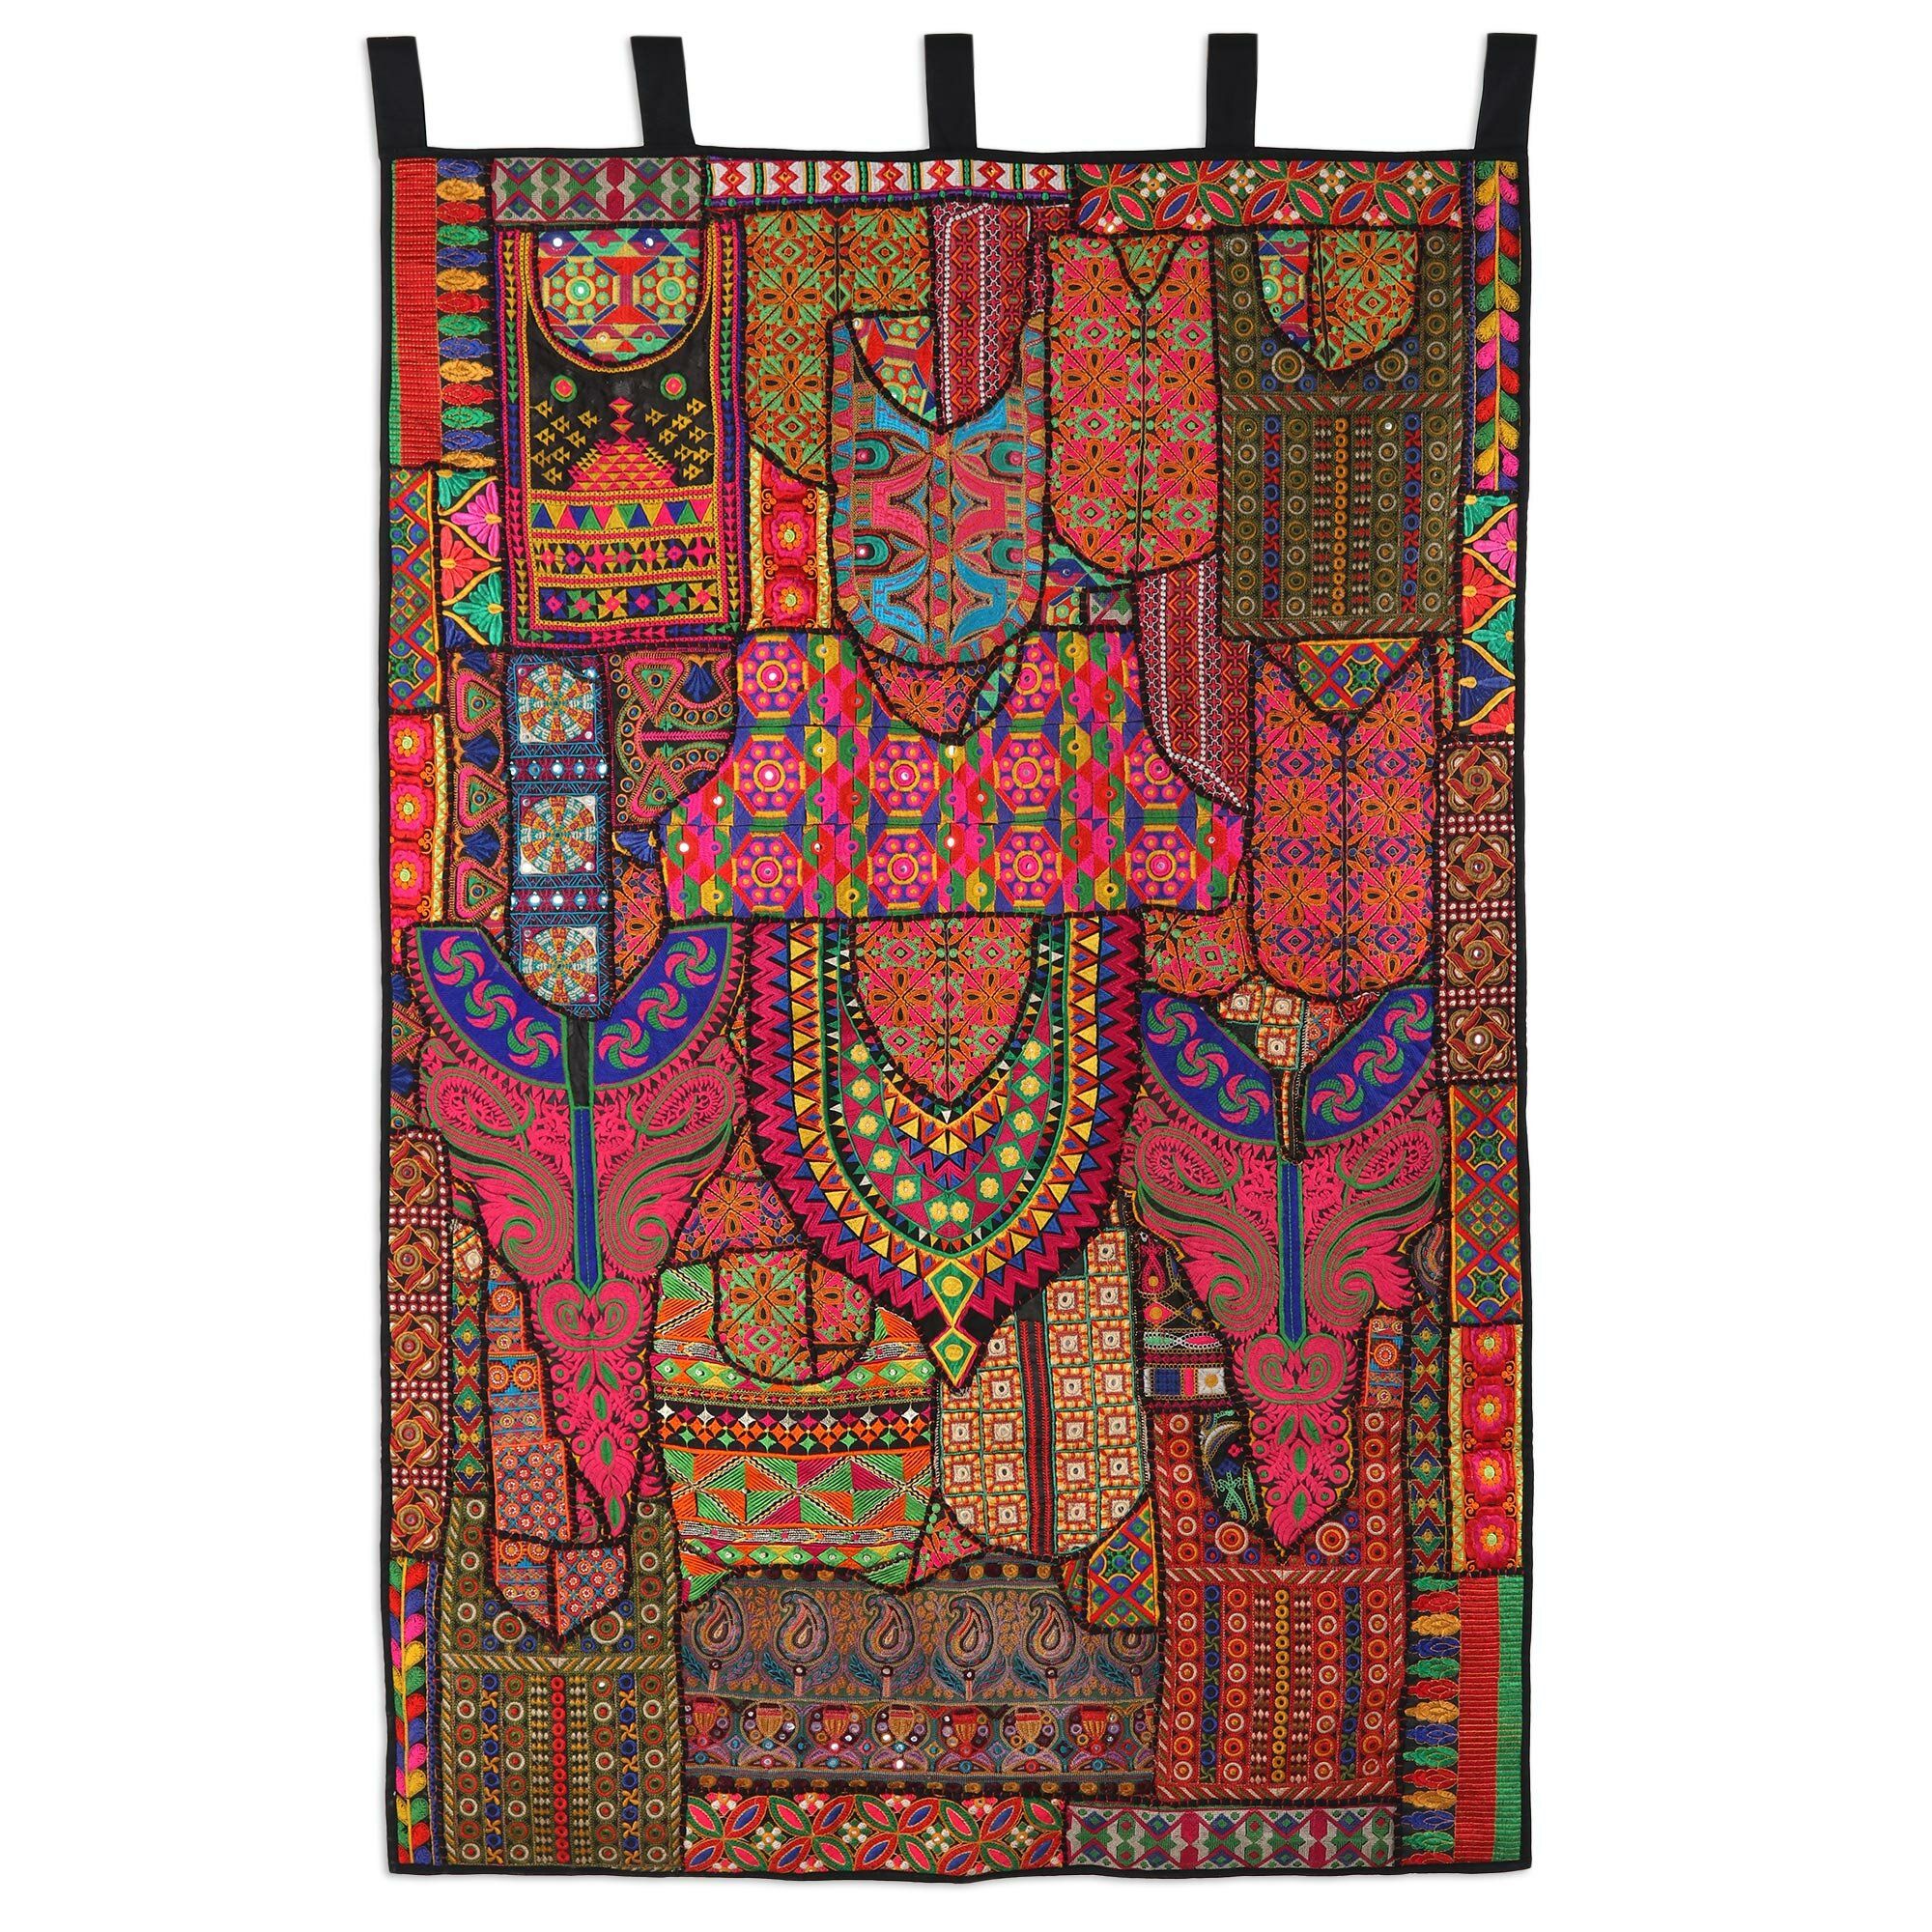 Handmade Indian Flavor Recycled Cotton Blend Patchwork Wall Hanging In Latest Blended Fabric Ranier Wall Hangings With Hanging Accessories Included (Gallery 9 of 20)